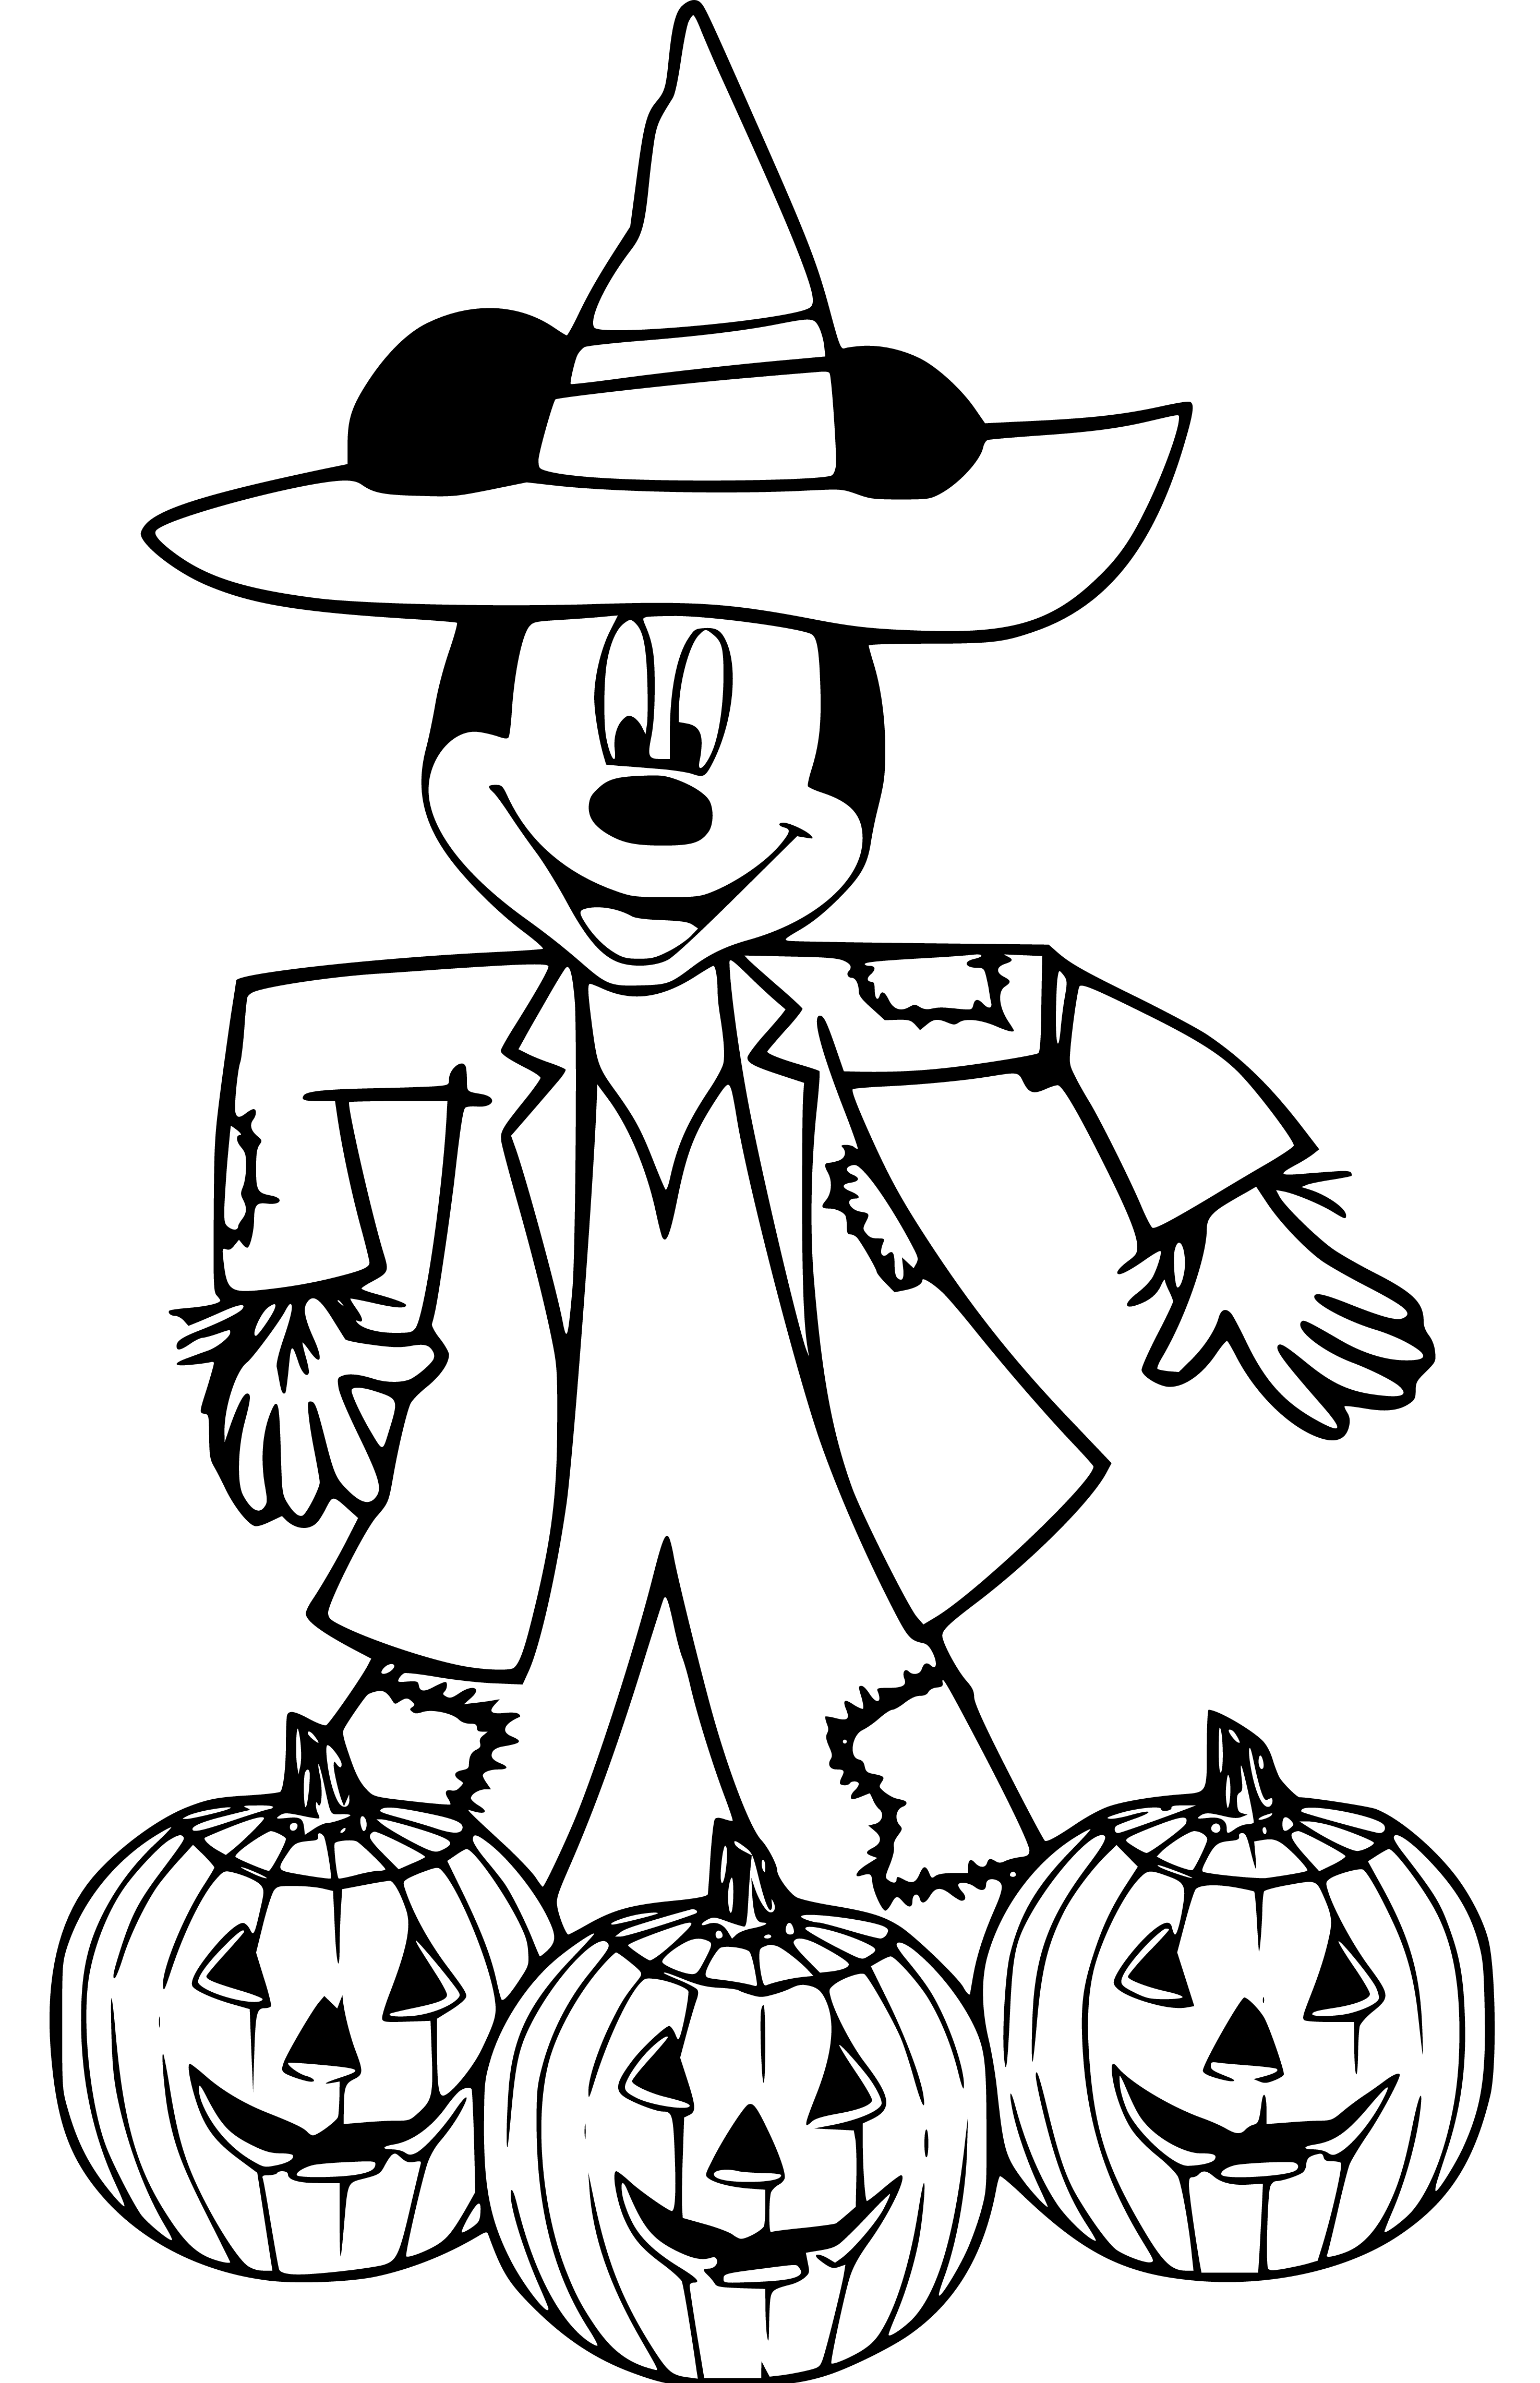 Mickey Mouse celebrating halloween Coloring Page for Children - SheetalColor.com